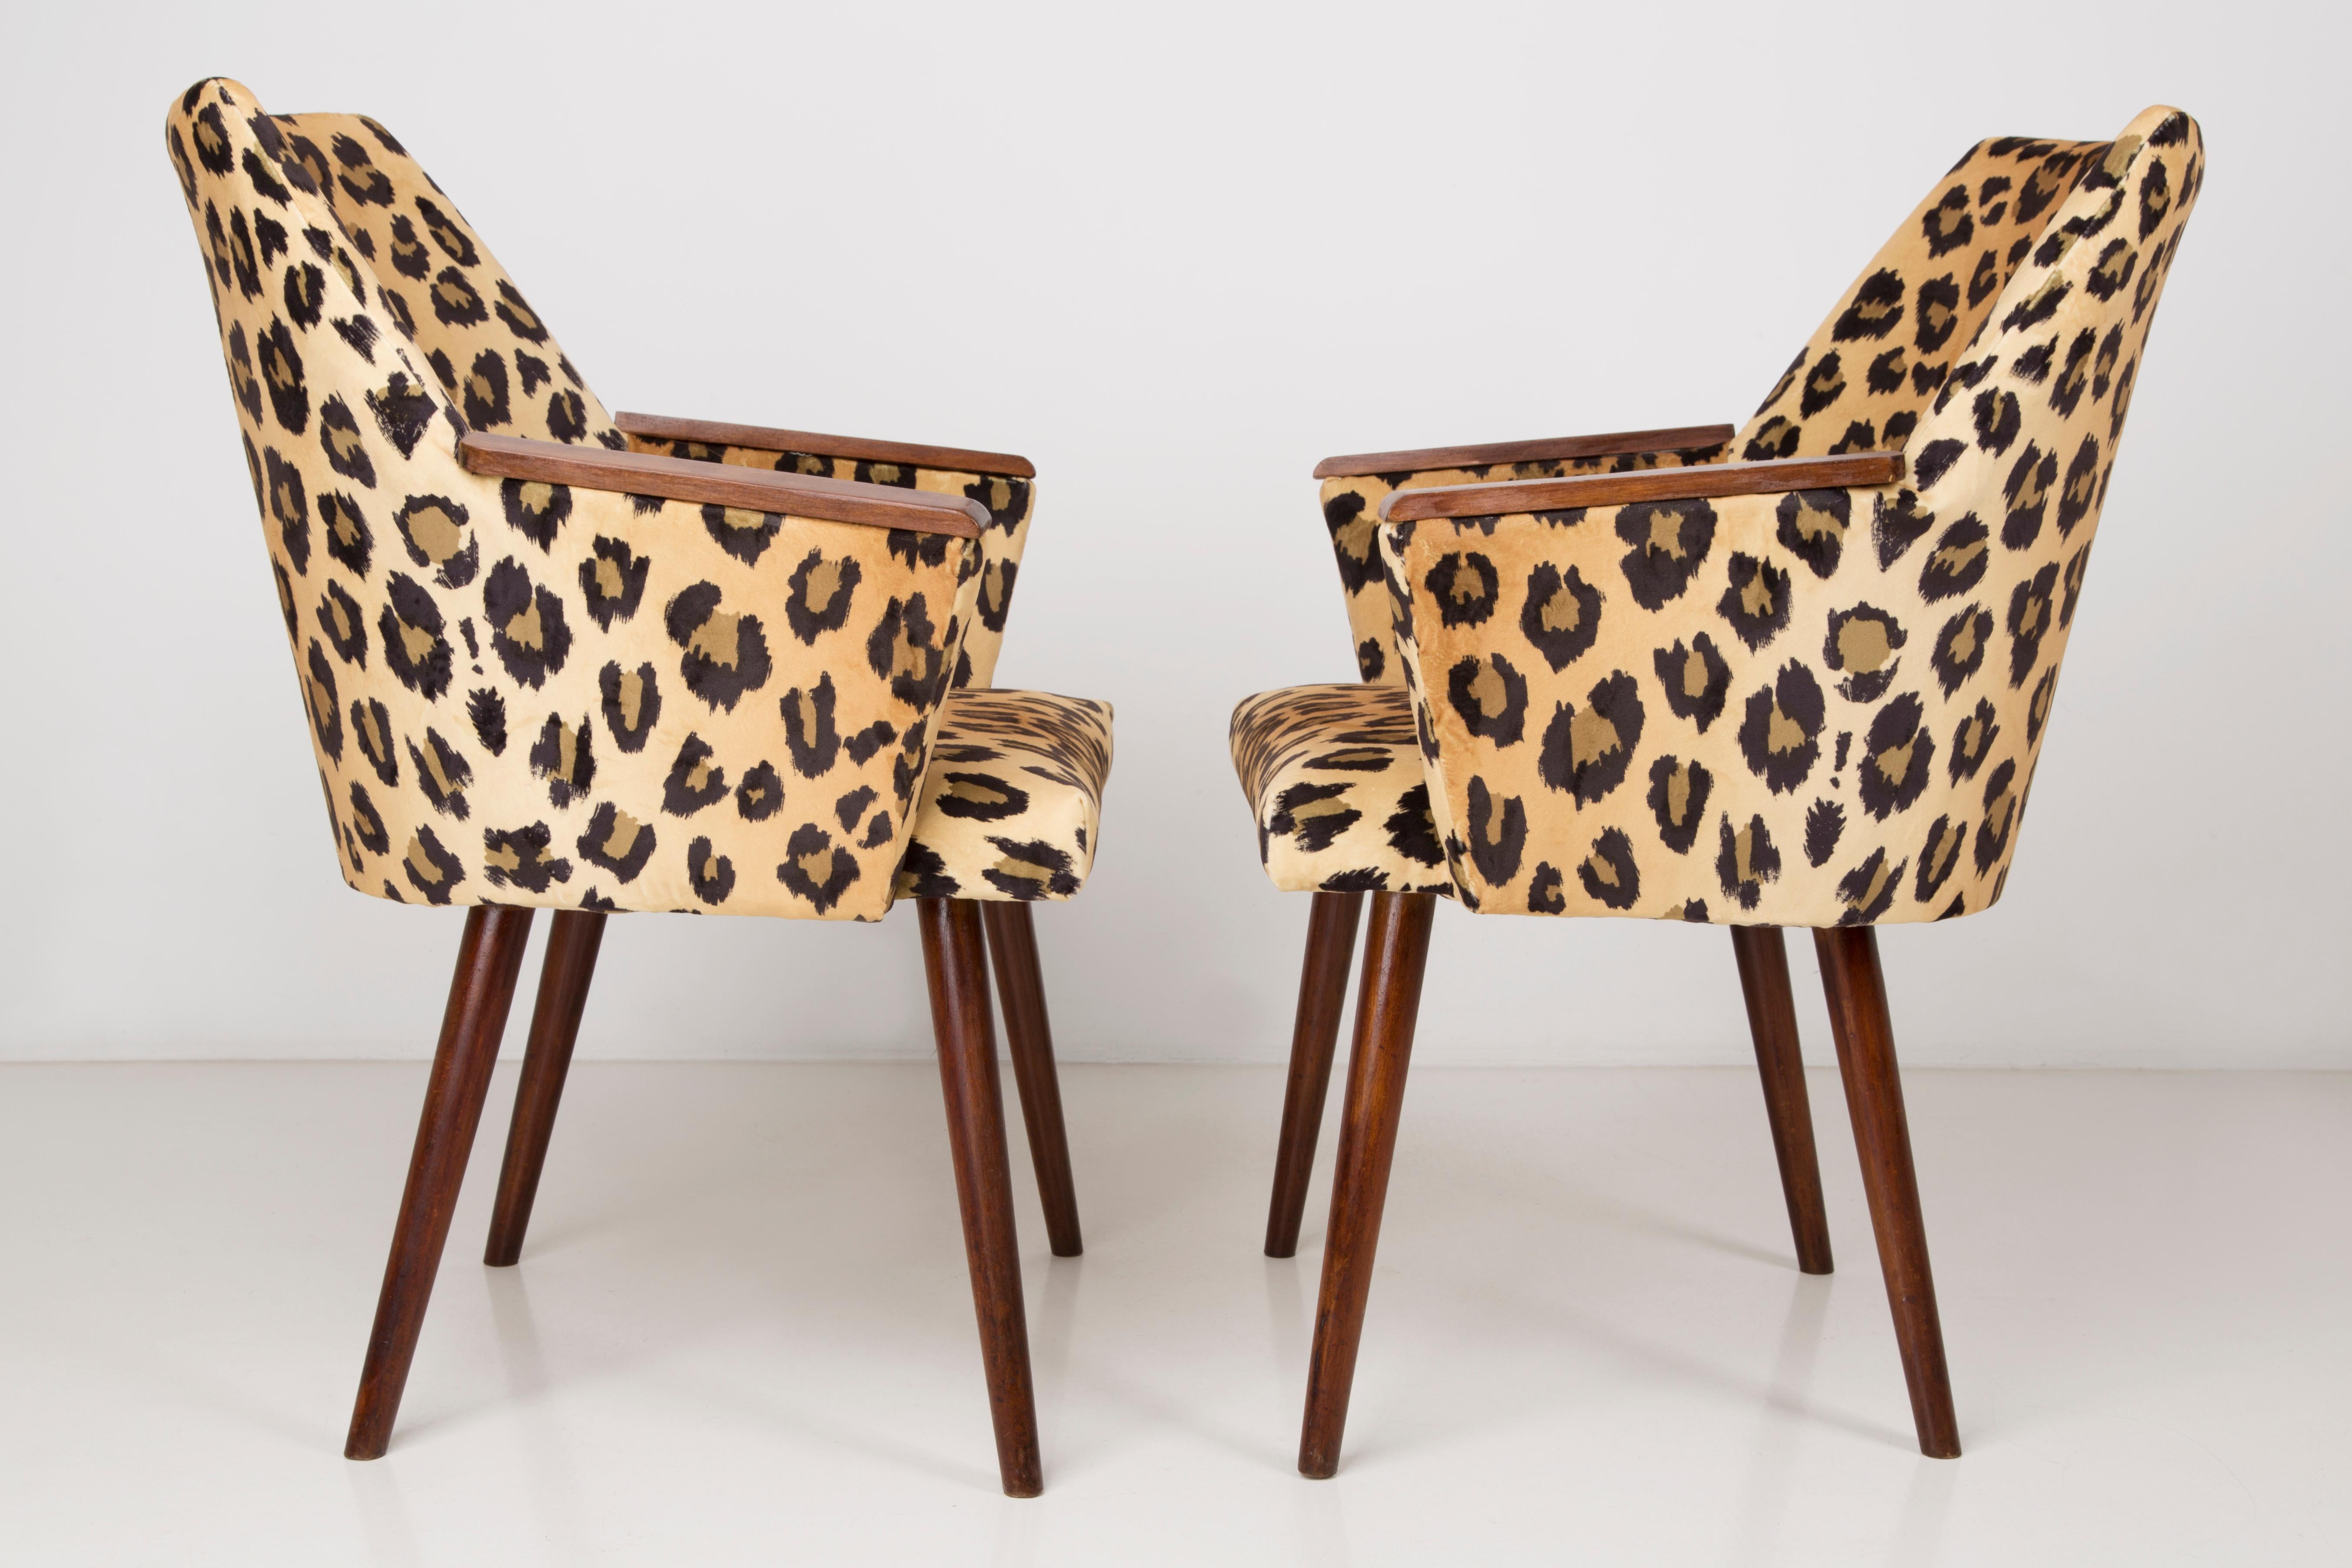 Set of Two Mid-Century Modern Leopard Print Chairs, 1960s, Germany 6